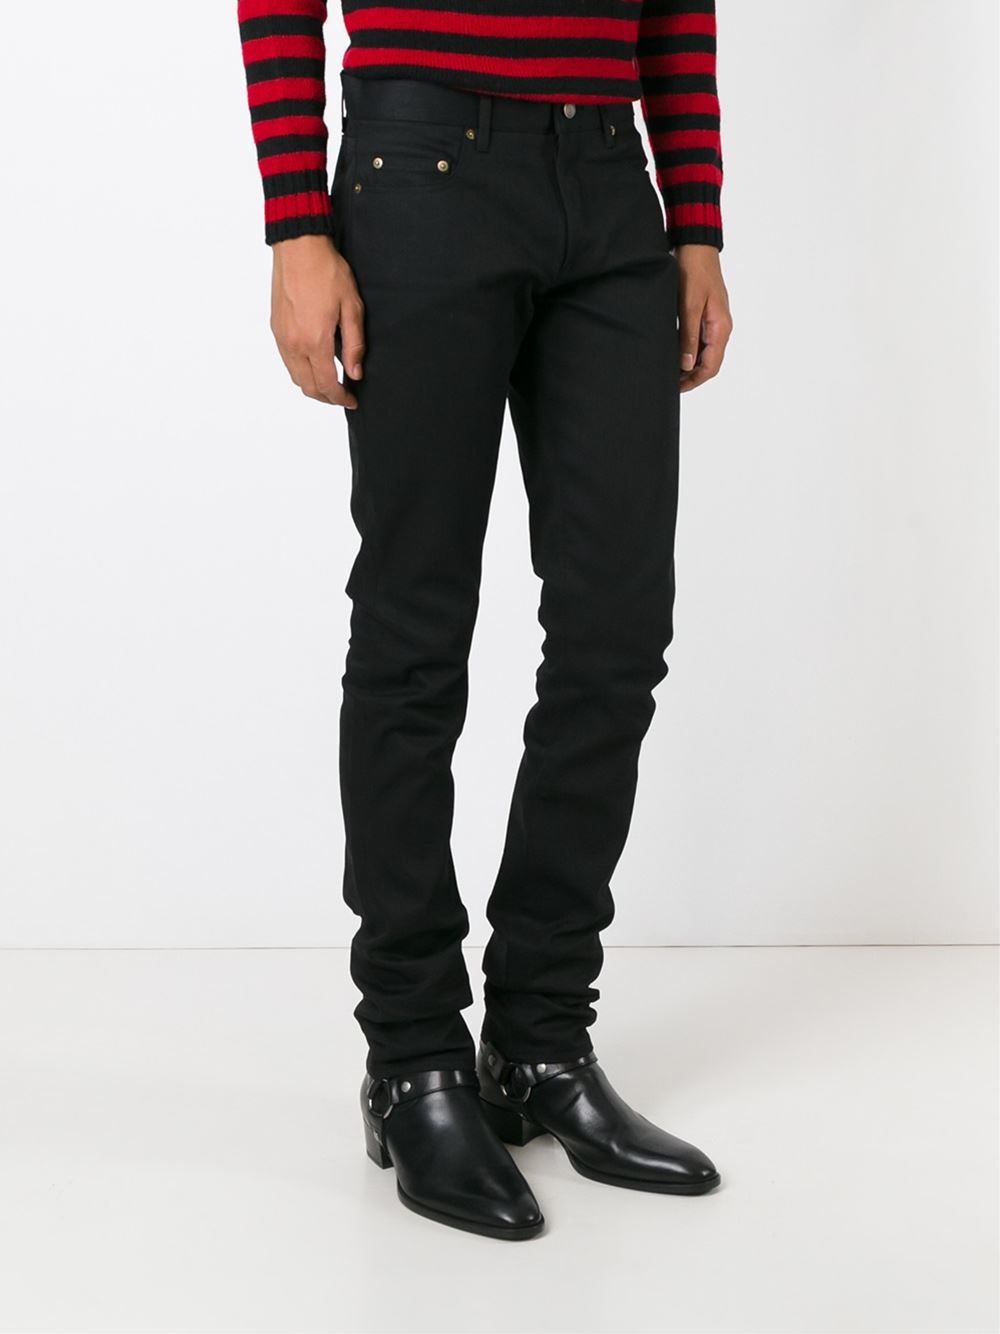 Suggestions for a pair of black skinny jeans? : malefashionadvice